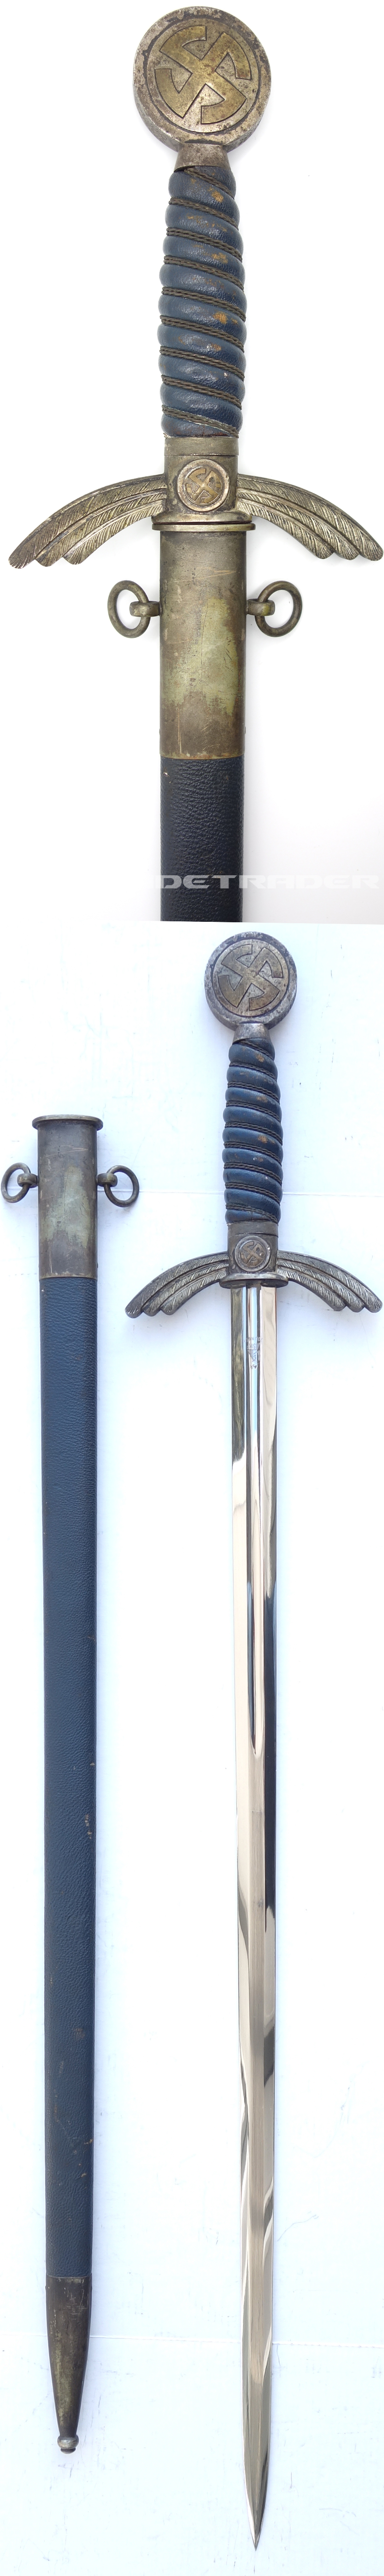 Early Luftwaffe Sword by SMF